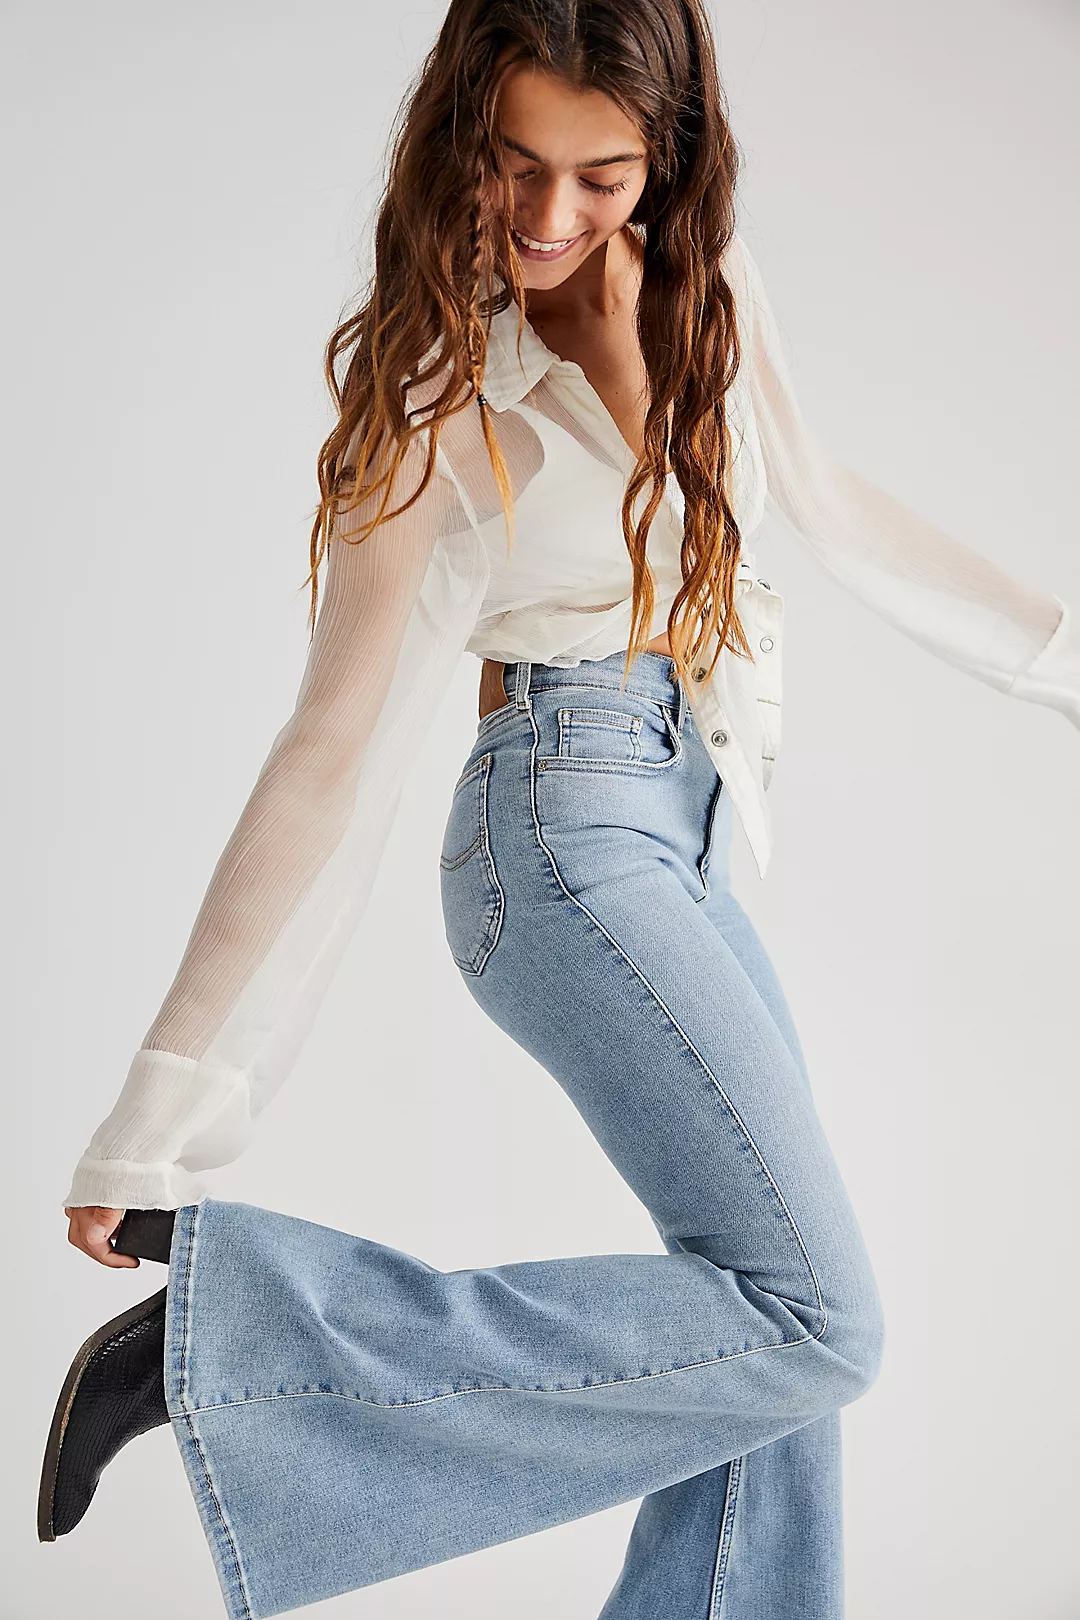 Lee High-Rise Sized For You Flare Jeans